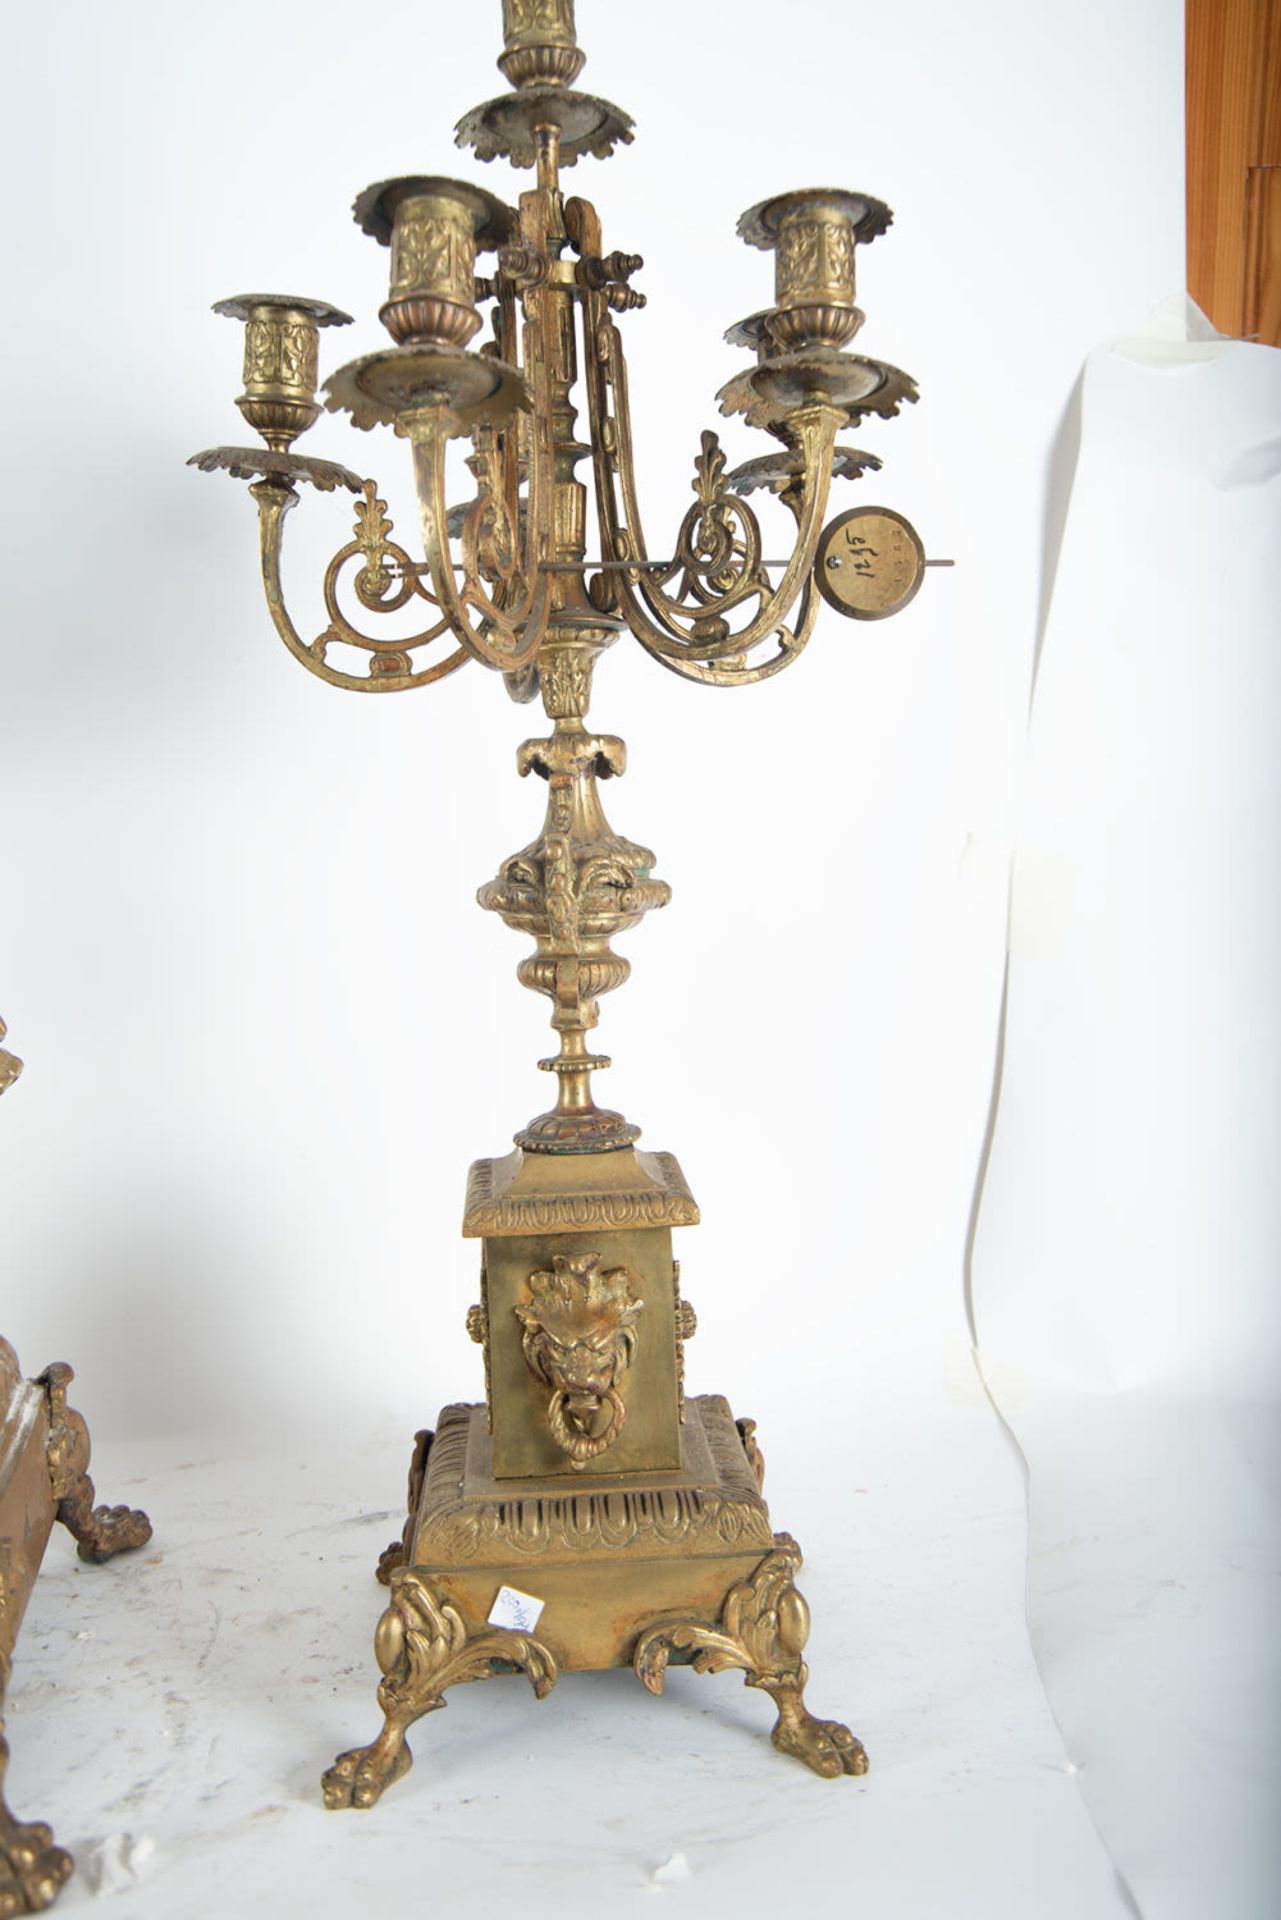 Garniture in gilt bronze with caryatids. Charles X style, 19th century - Image 8 of 9